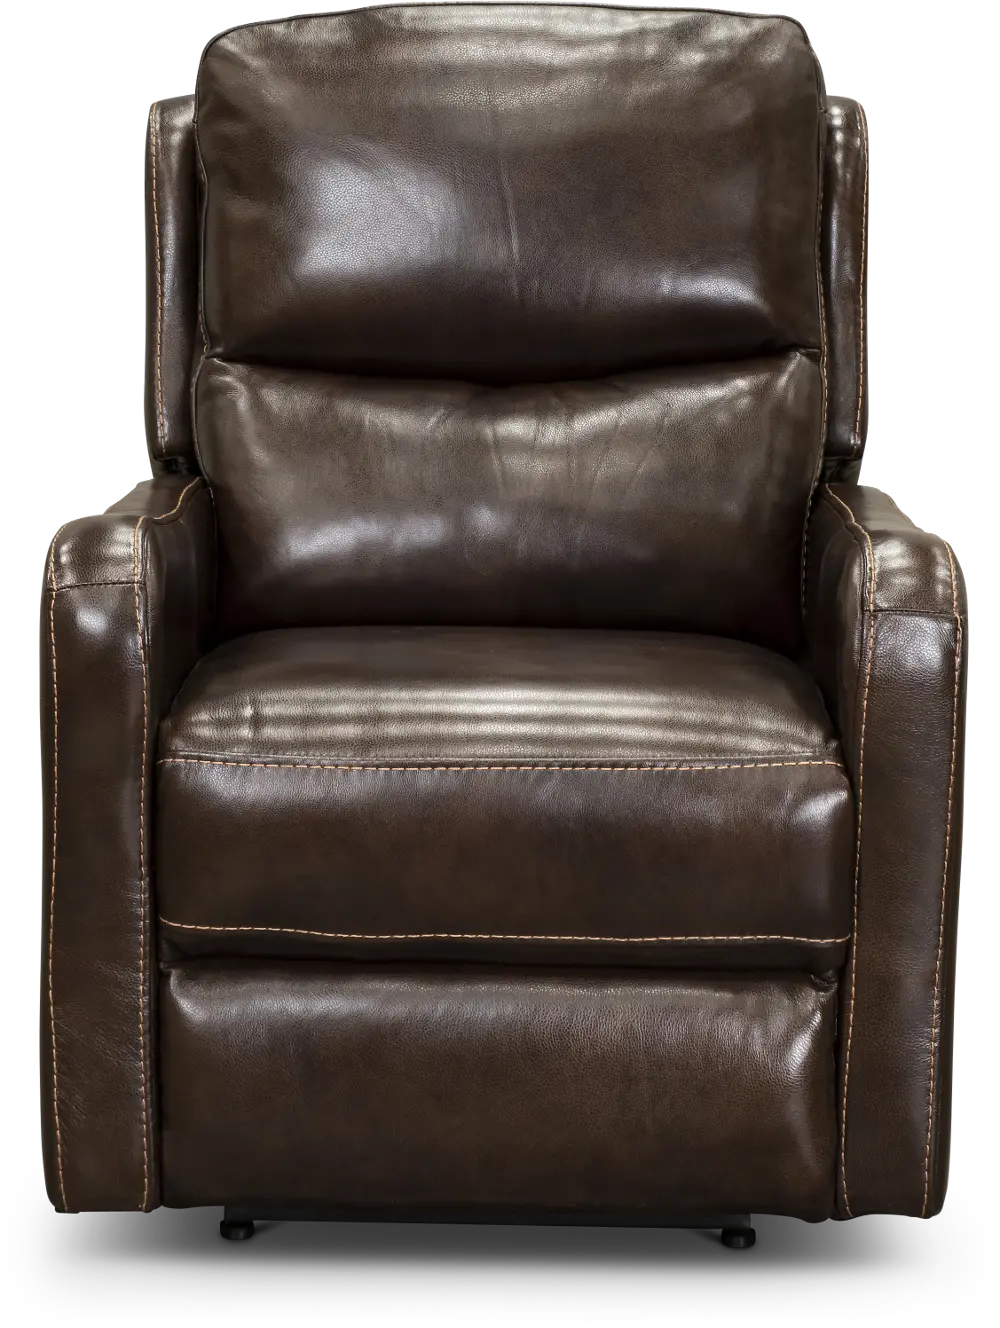 Mahogany Leather-Match Power Recliner with Power Lumbar and Headrest - Chia-1